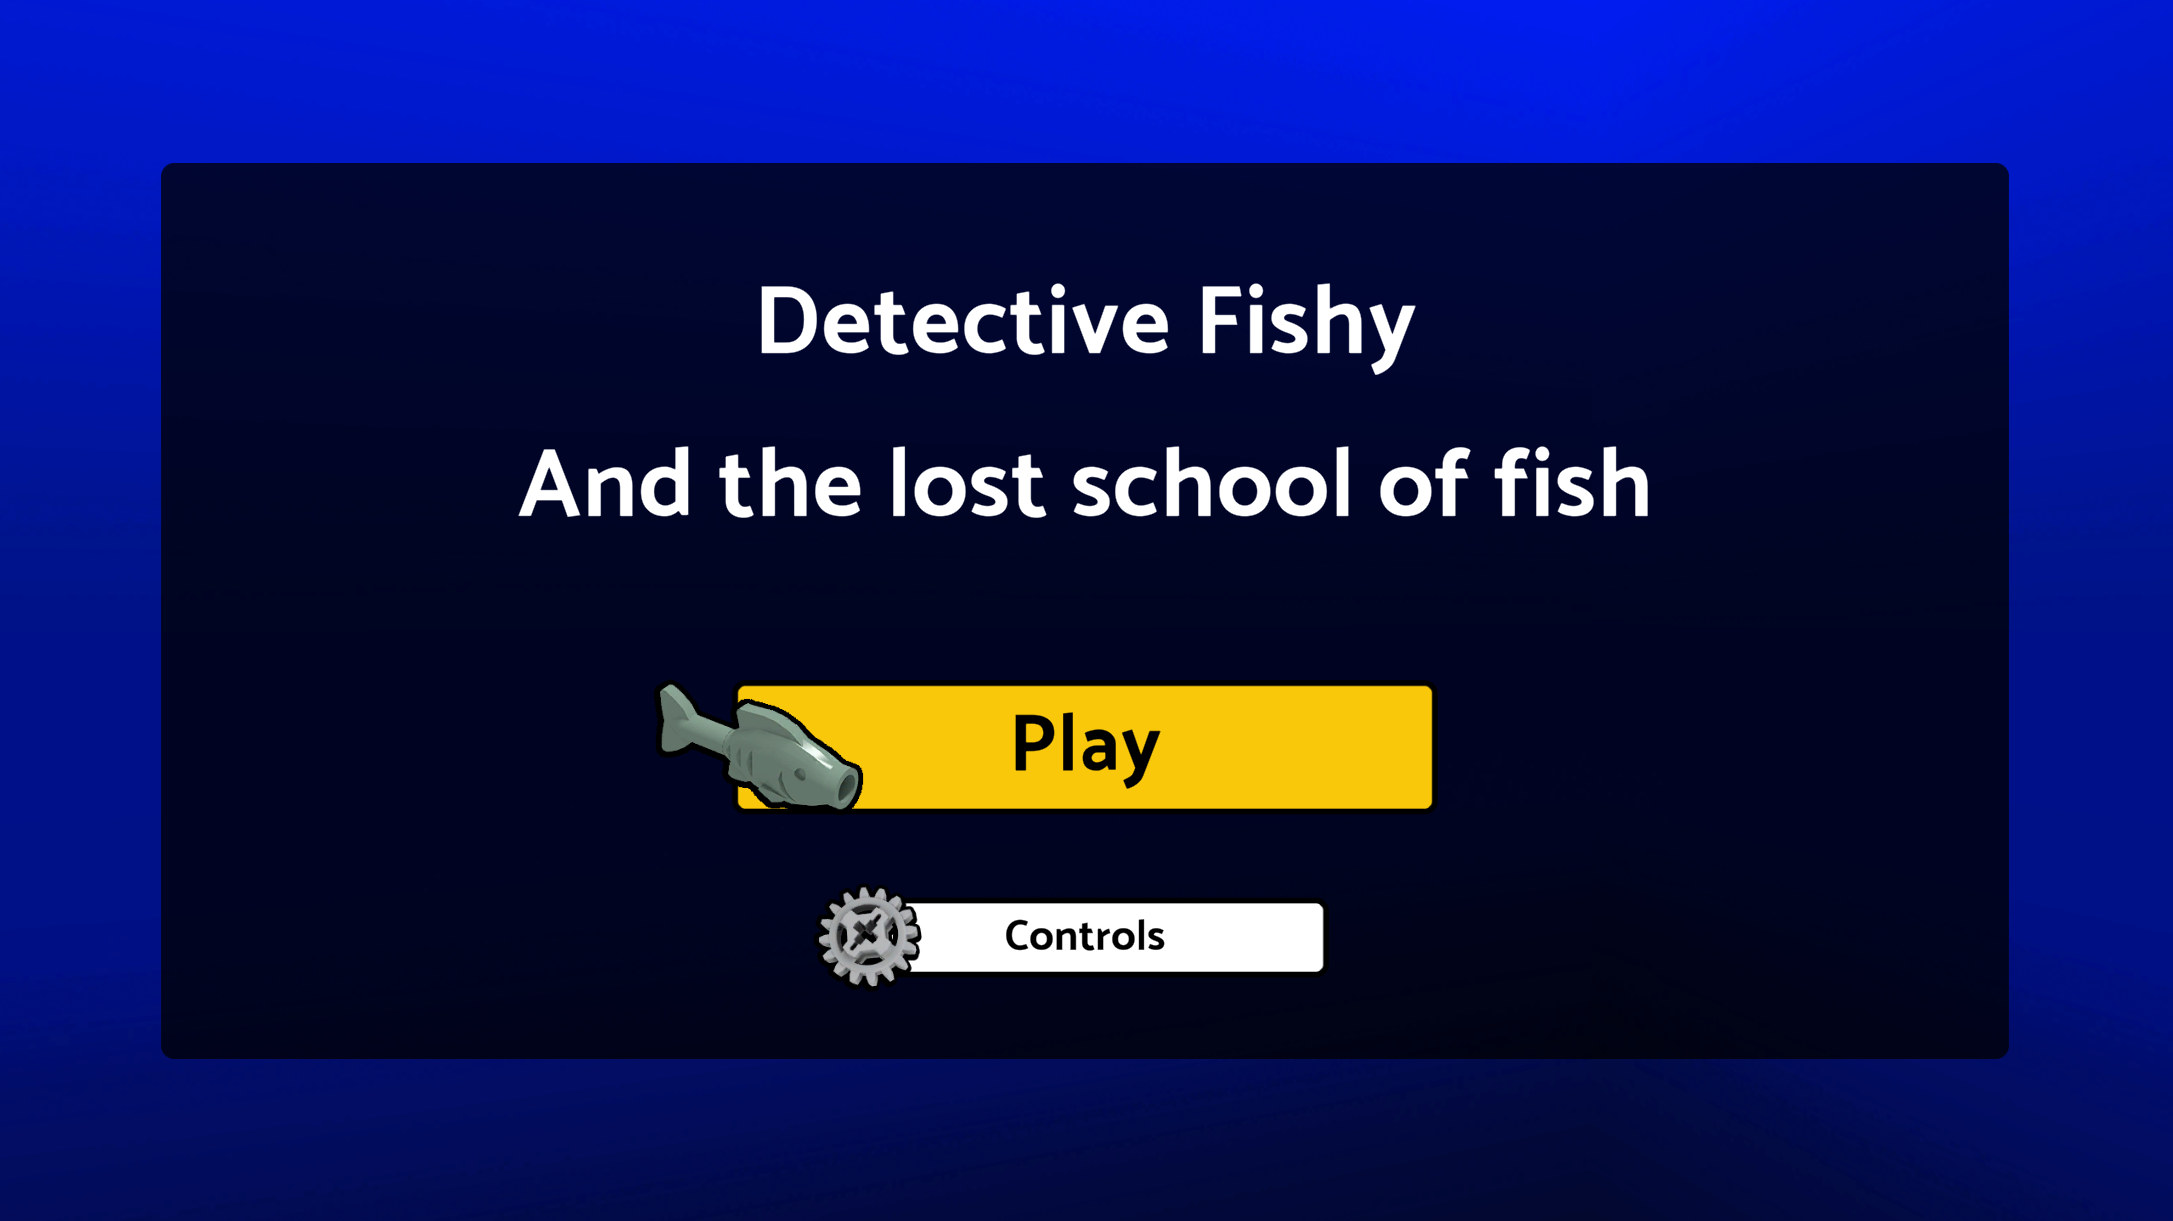 Detective Fishy and the lost school of fish